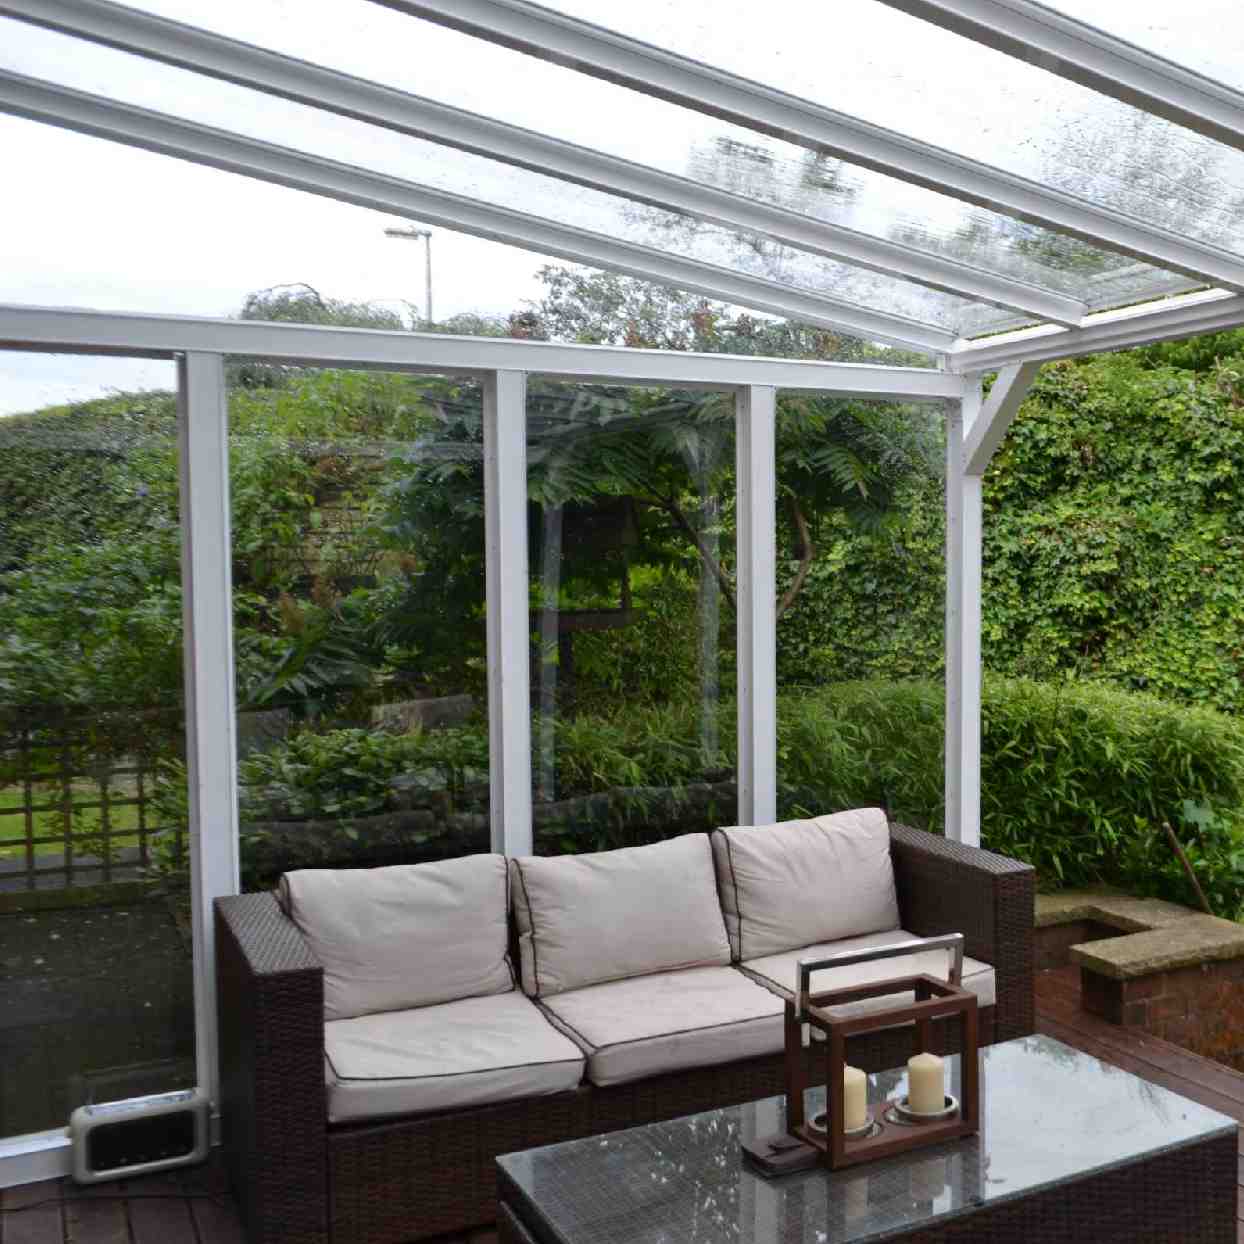 Buy Omega Verandah White with 6mm Glass Clear Plate Polycarbonate Glazing - 8.4m (W) x 4.0m (P), (4) Supporting Posts online today